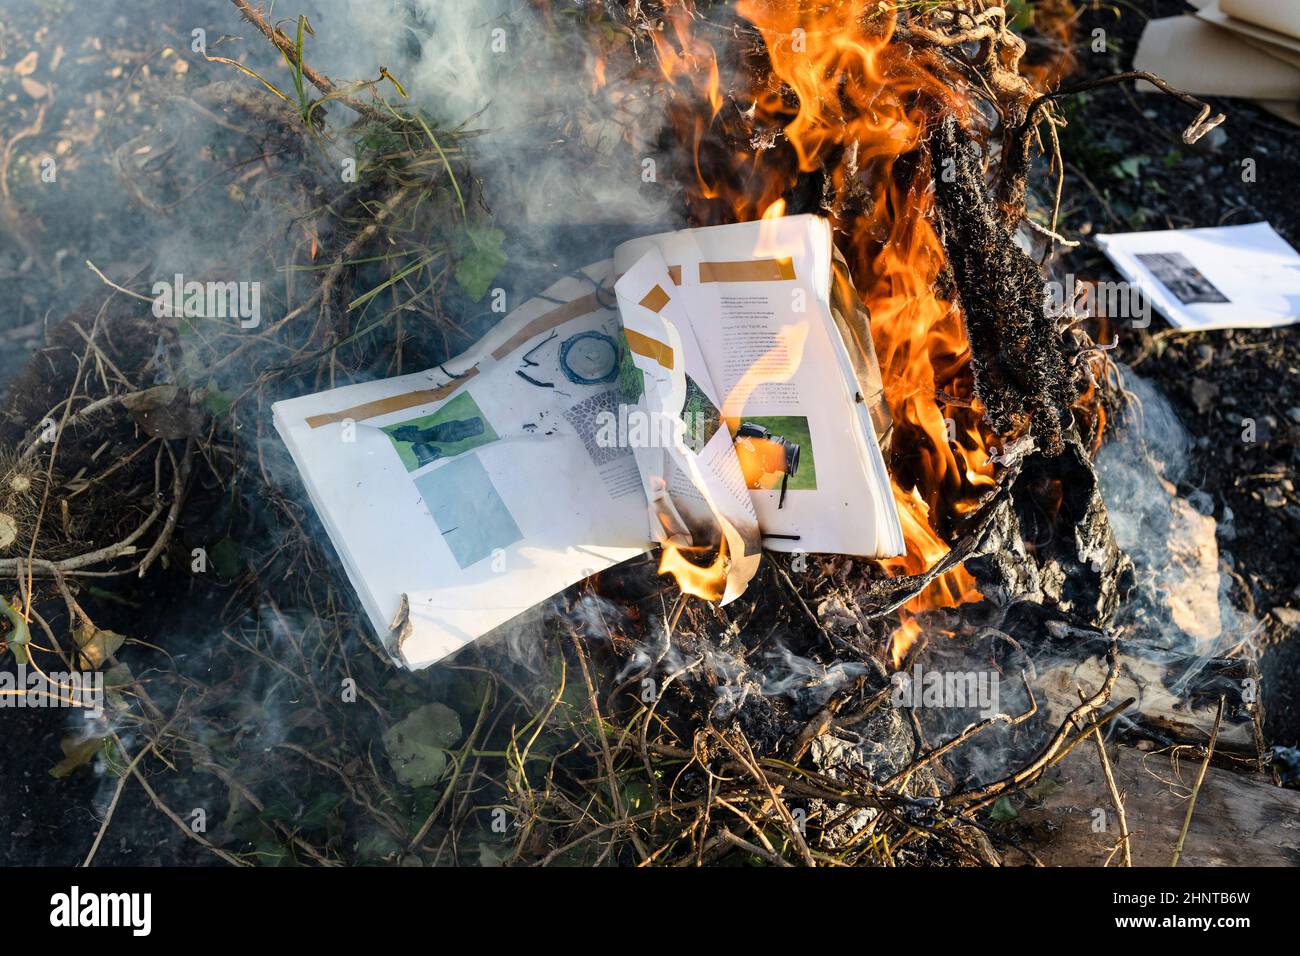 burning textbook on photography on branches Stock Photo